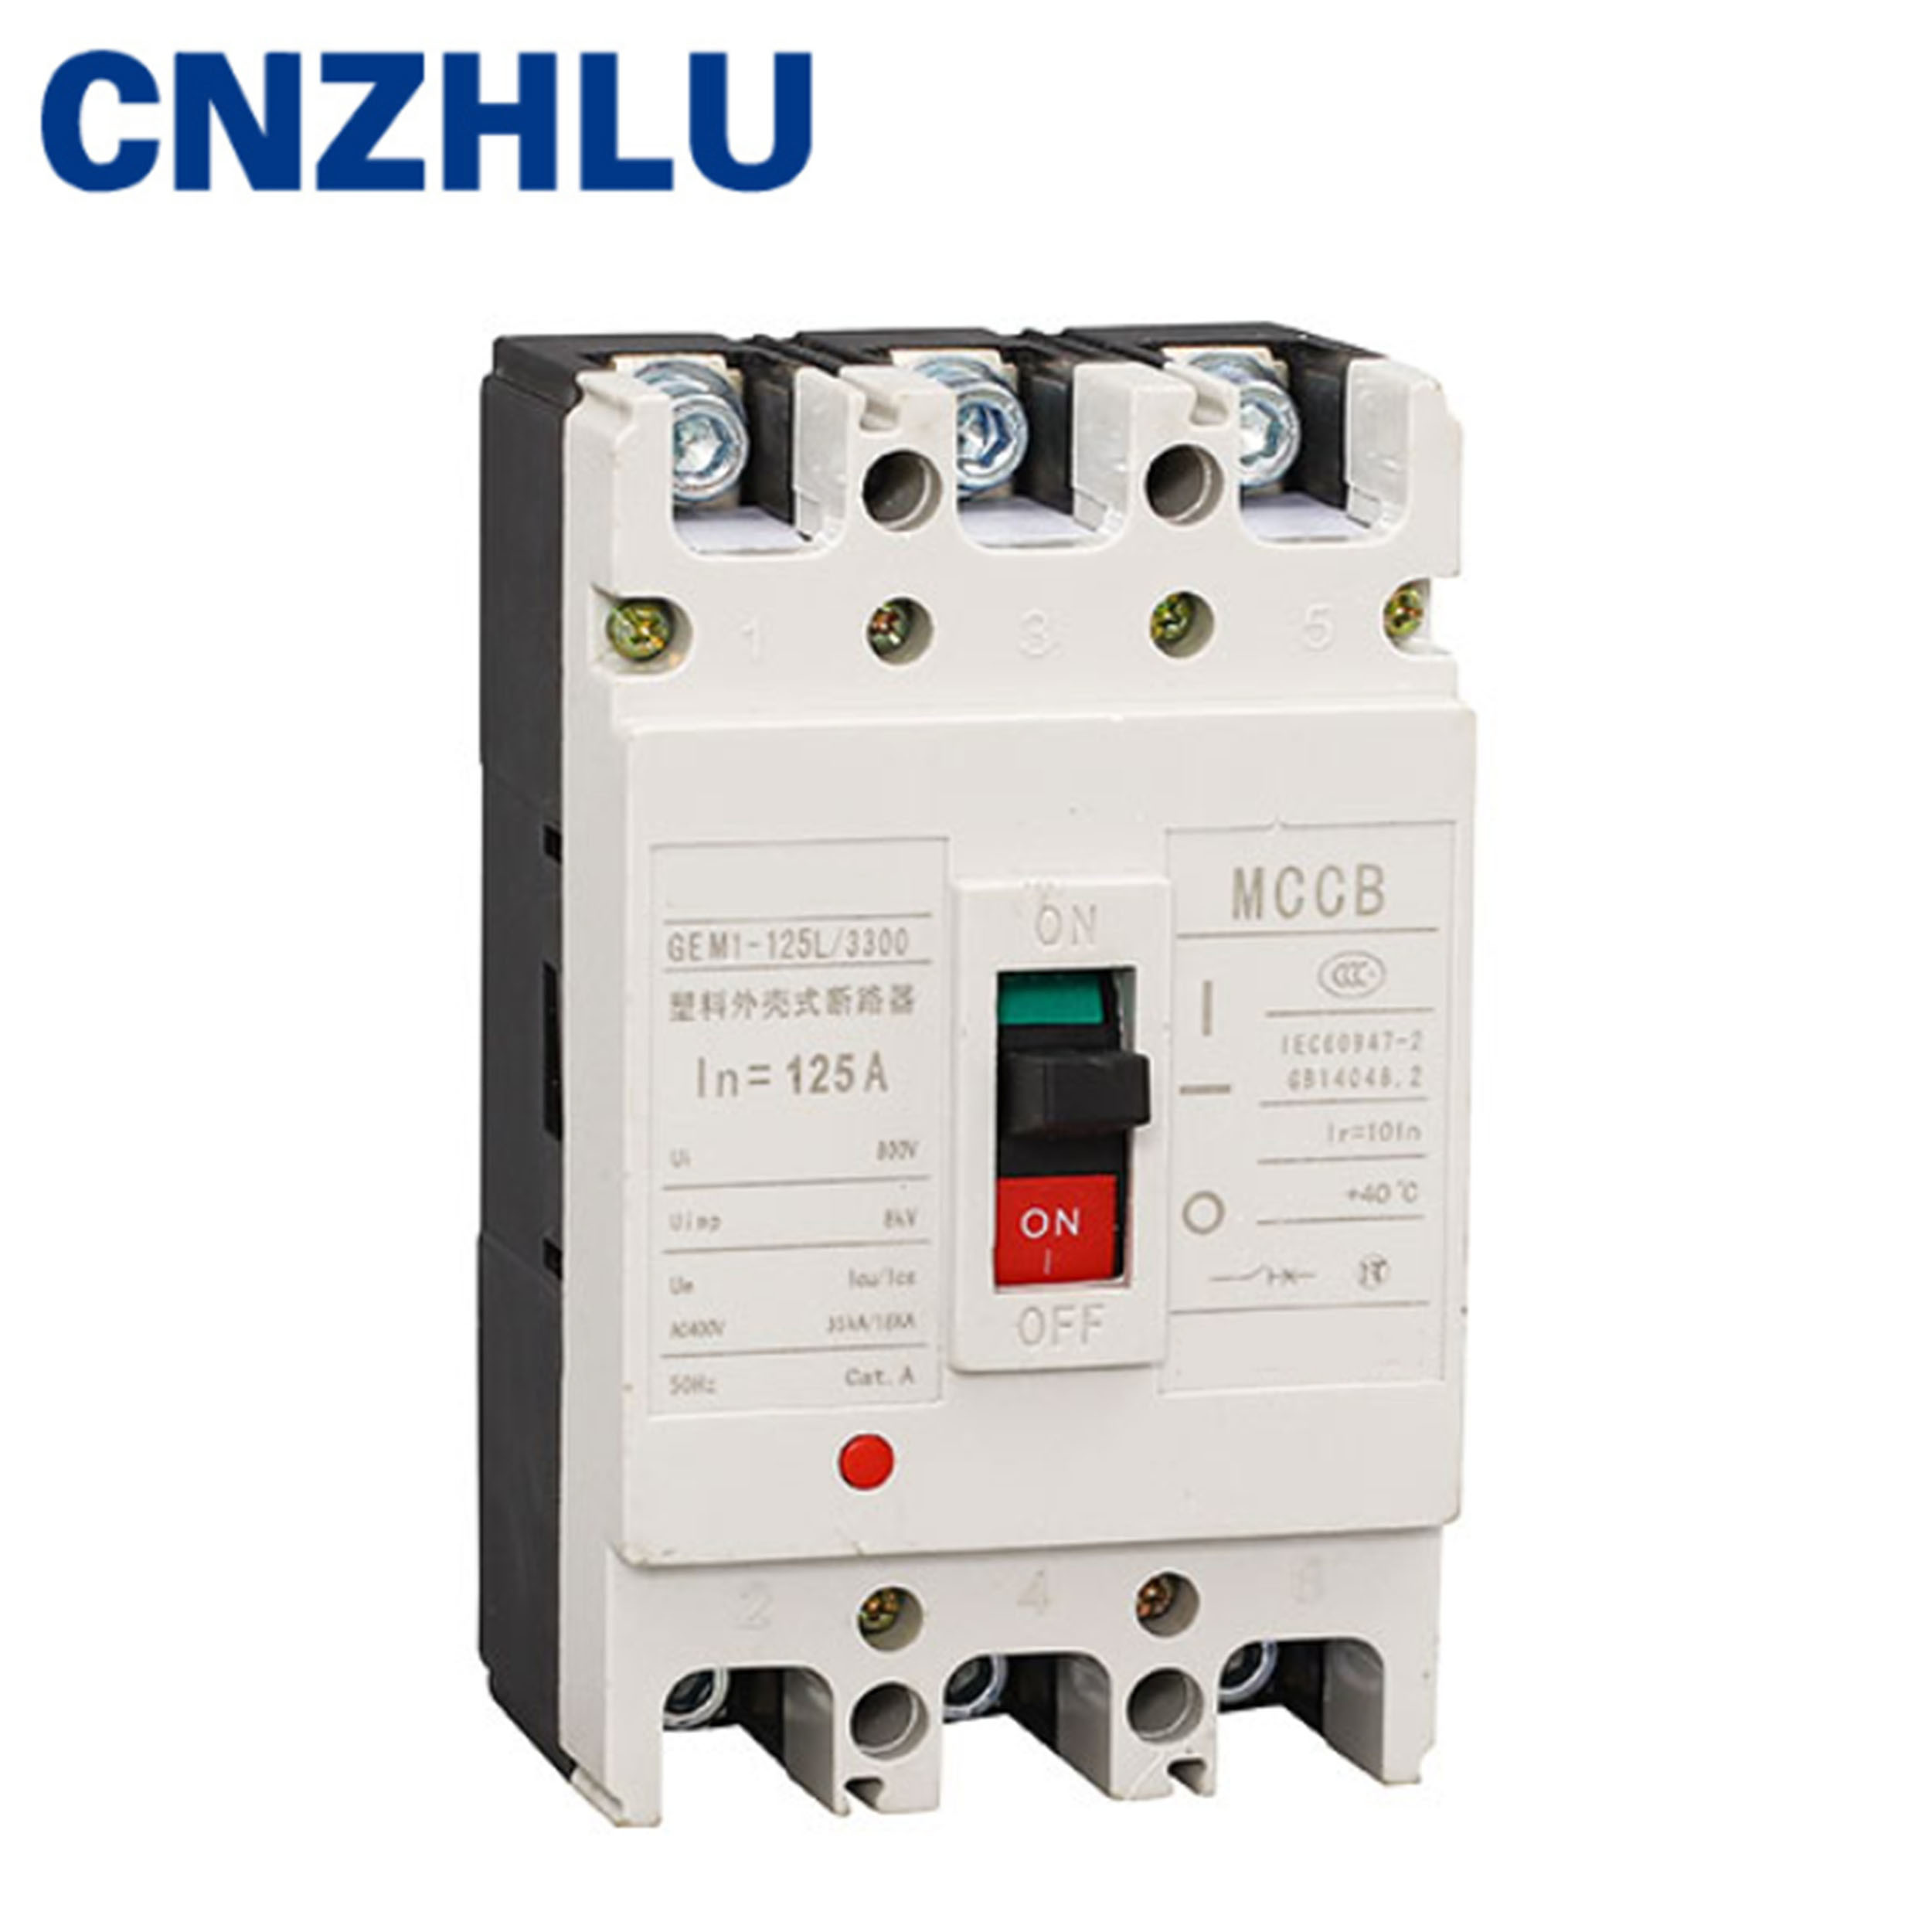 400 AMP 3 Pole Automatic Circuit Breaker with Overload, Short Circuit, Overvoltage Protection MCCB